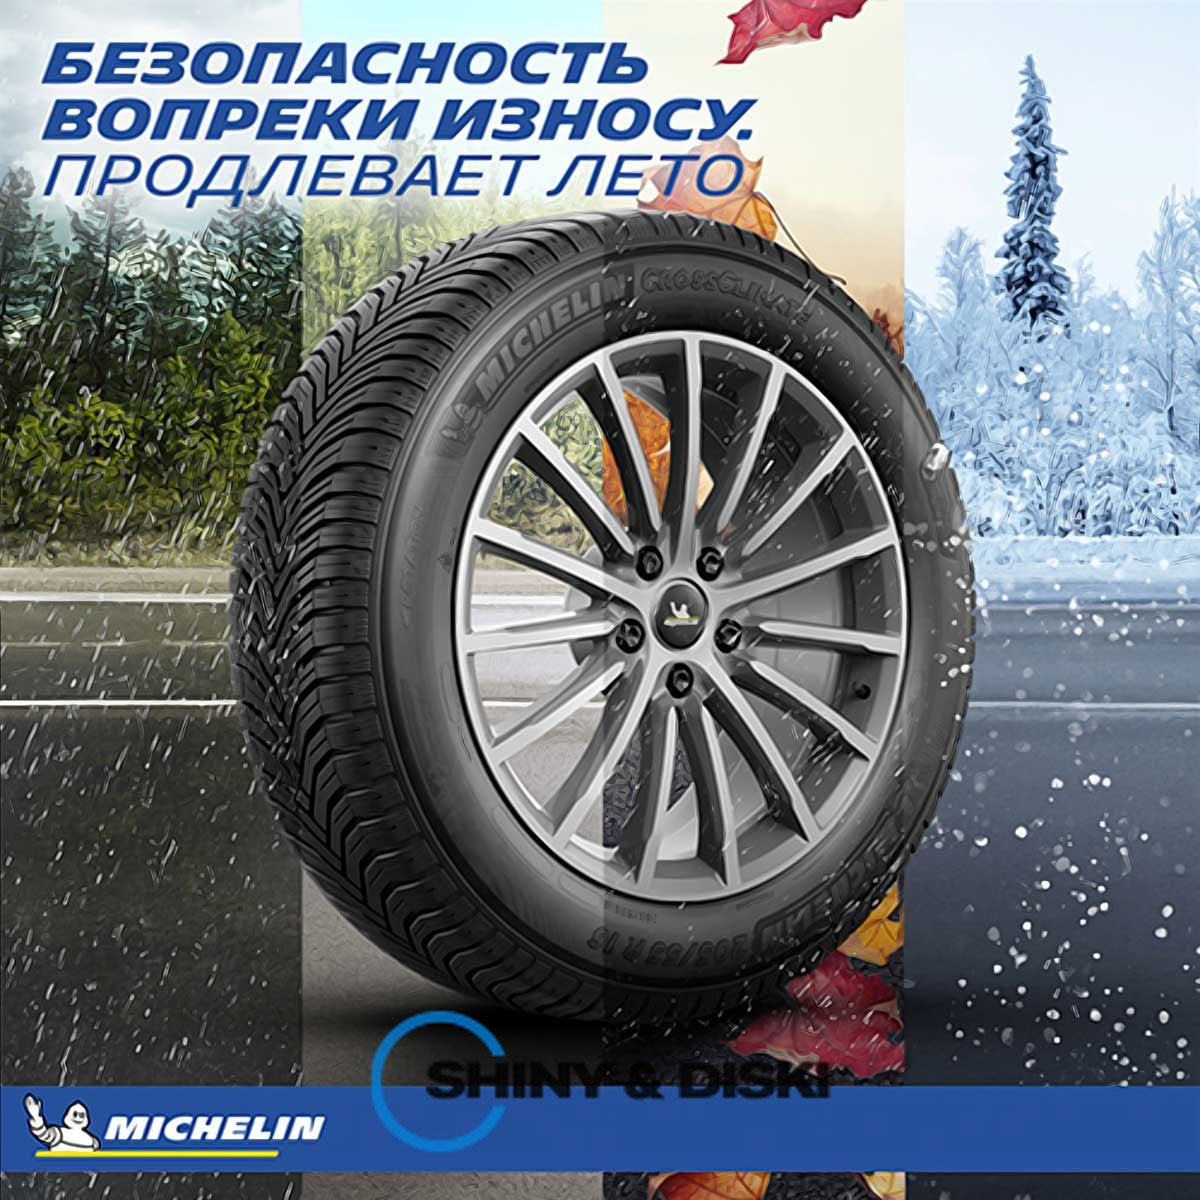 покрышки michelin cross climate+ 205/60 r16 96v xl